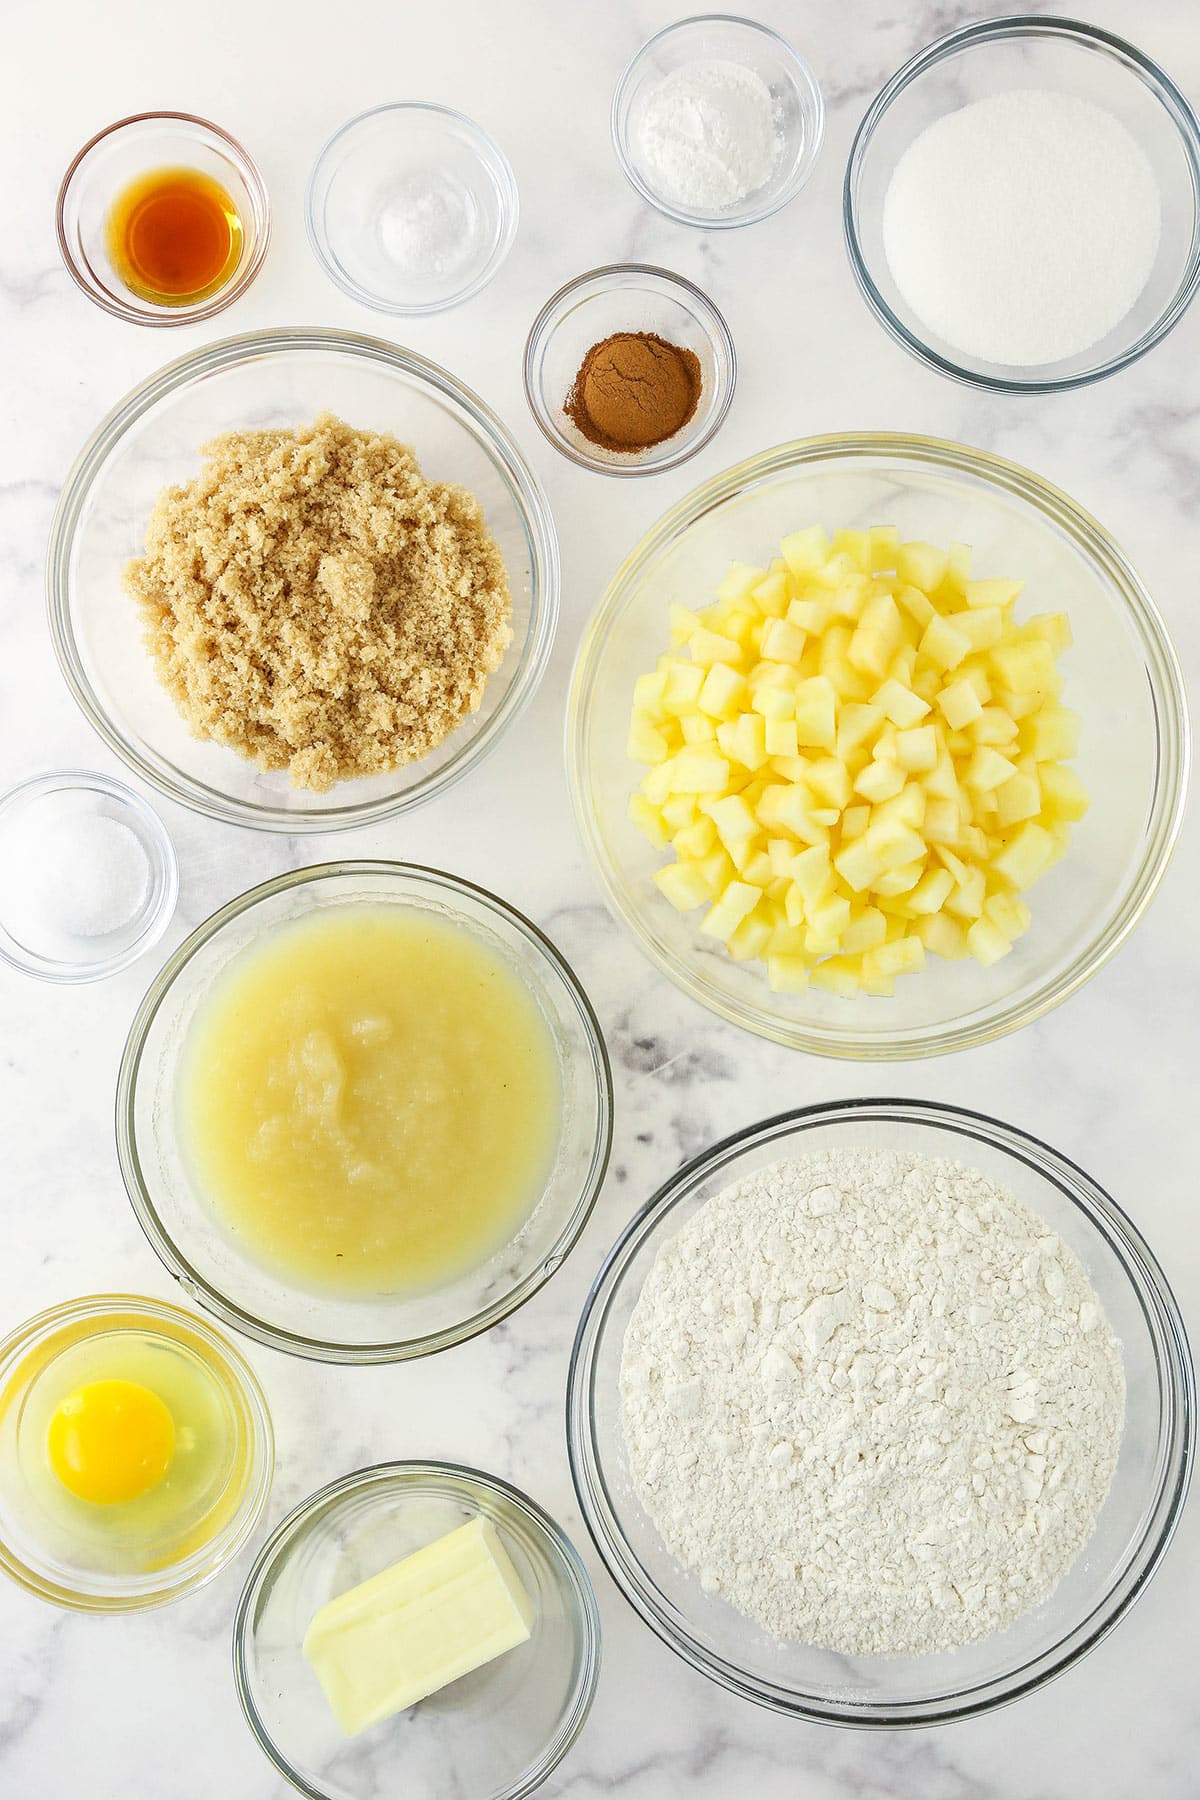 muffin ingredients in bowls on marble countertop